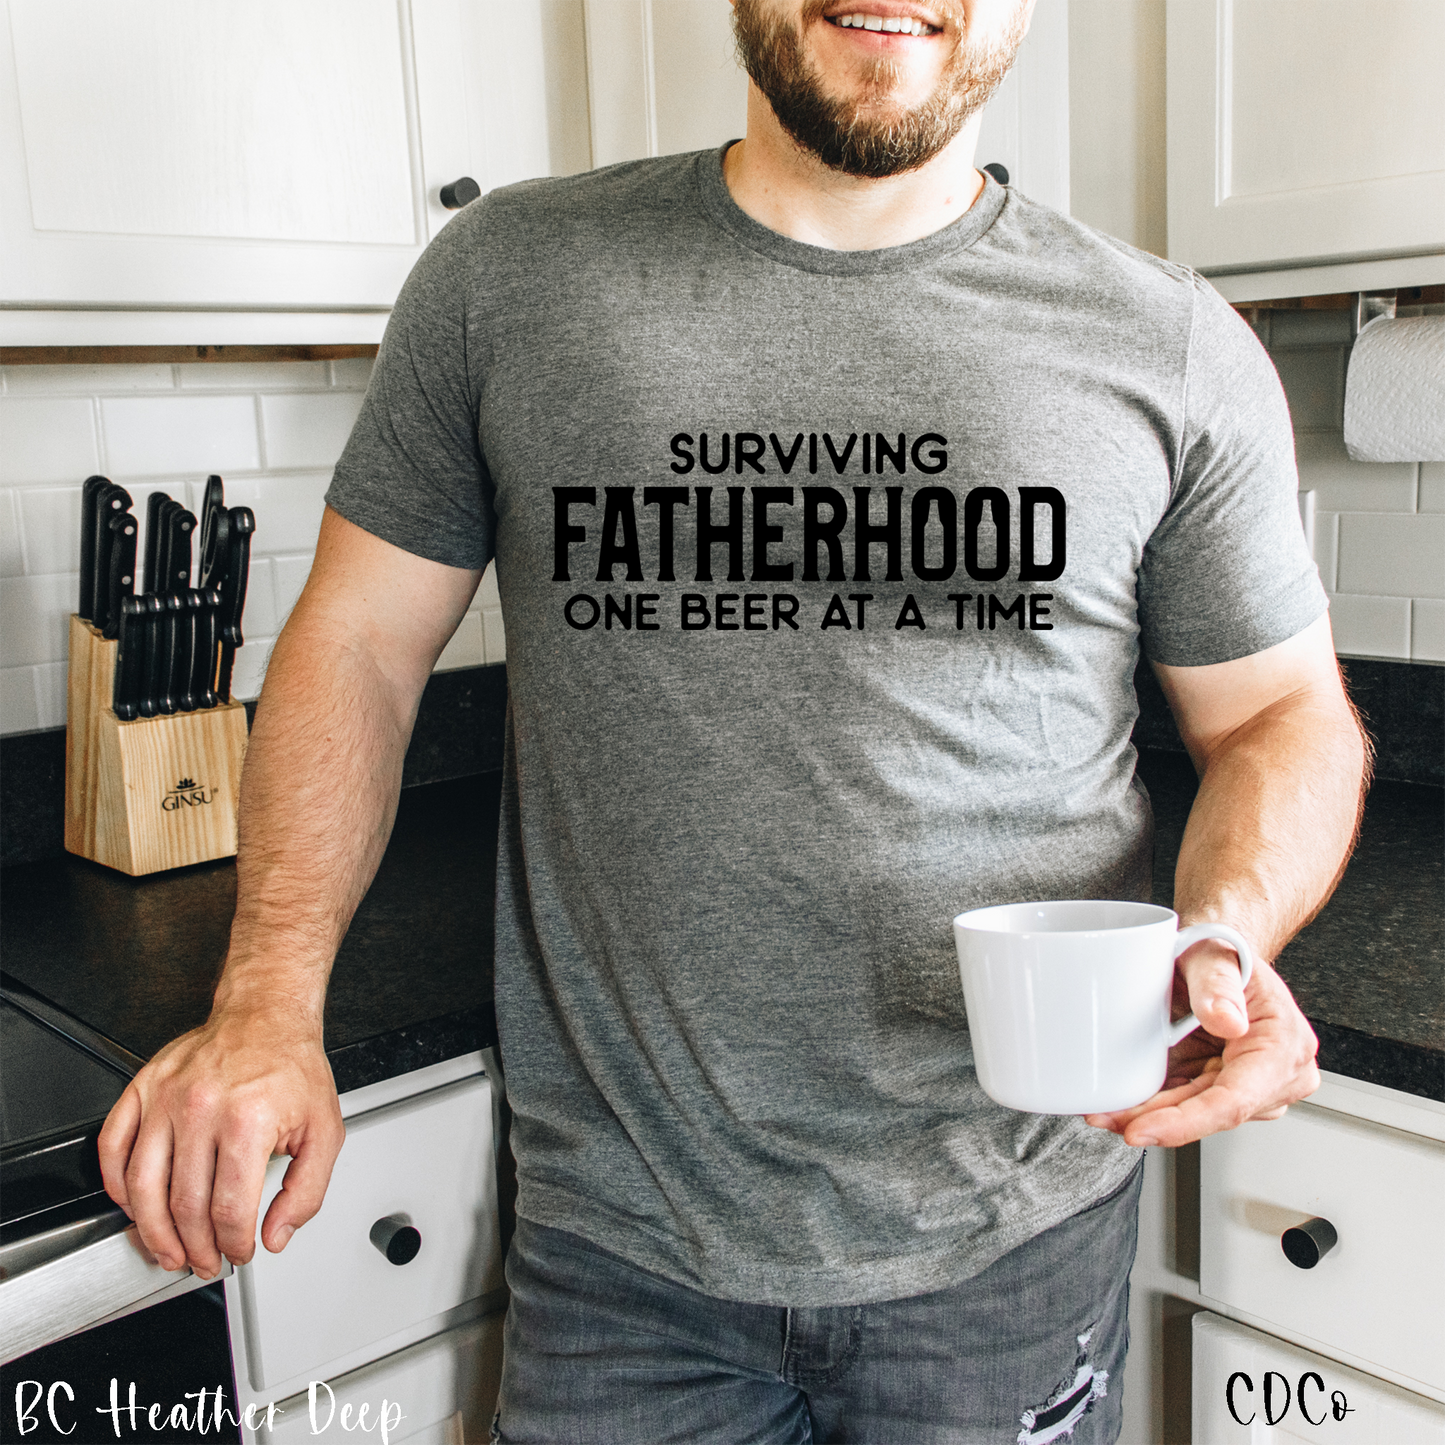 Surviving Fatherhood One Beer at a Time (325°)